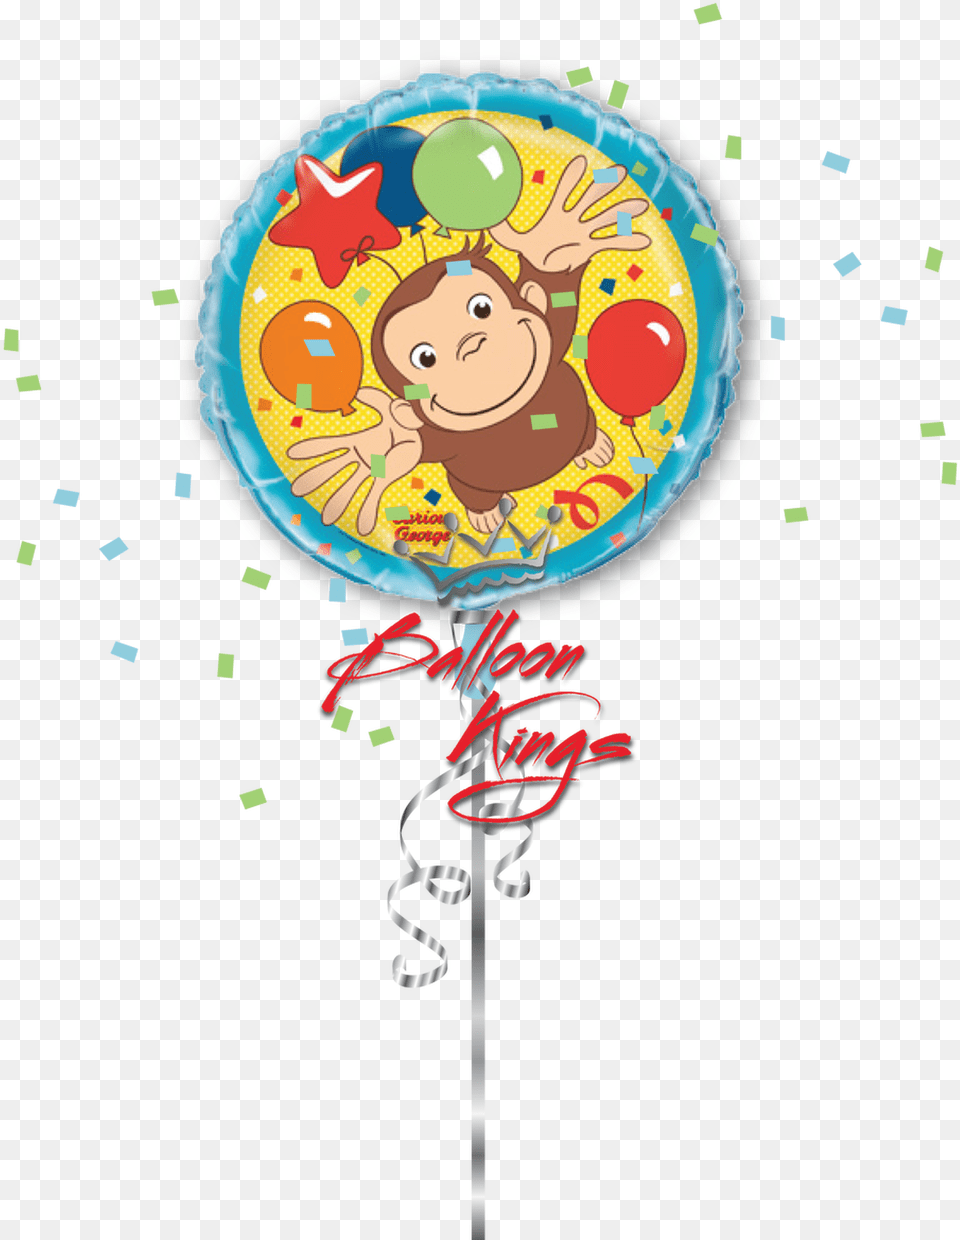 Curious George Happy Birthday Princess Tiana, Food, Sweets, Candy, Balloon Png